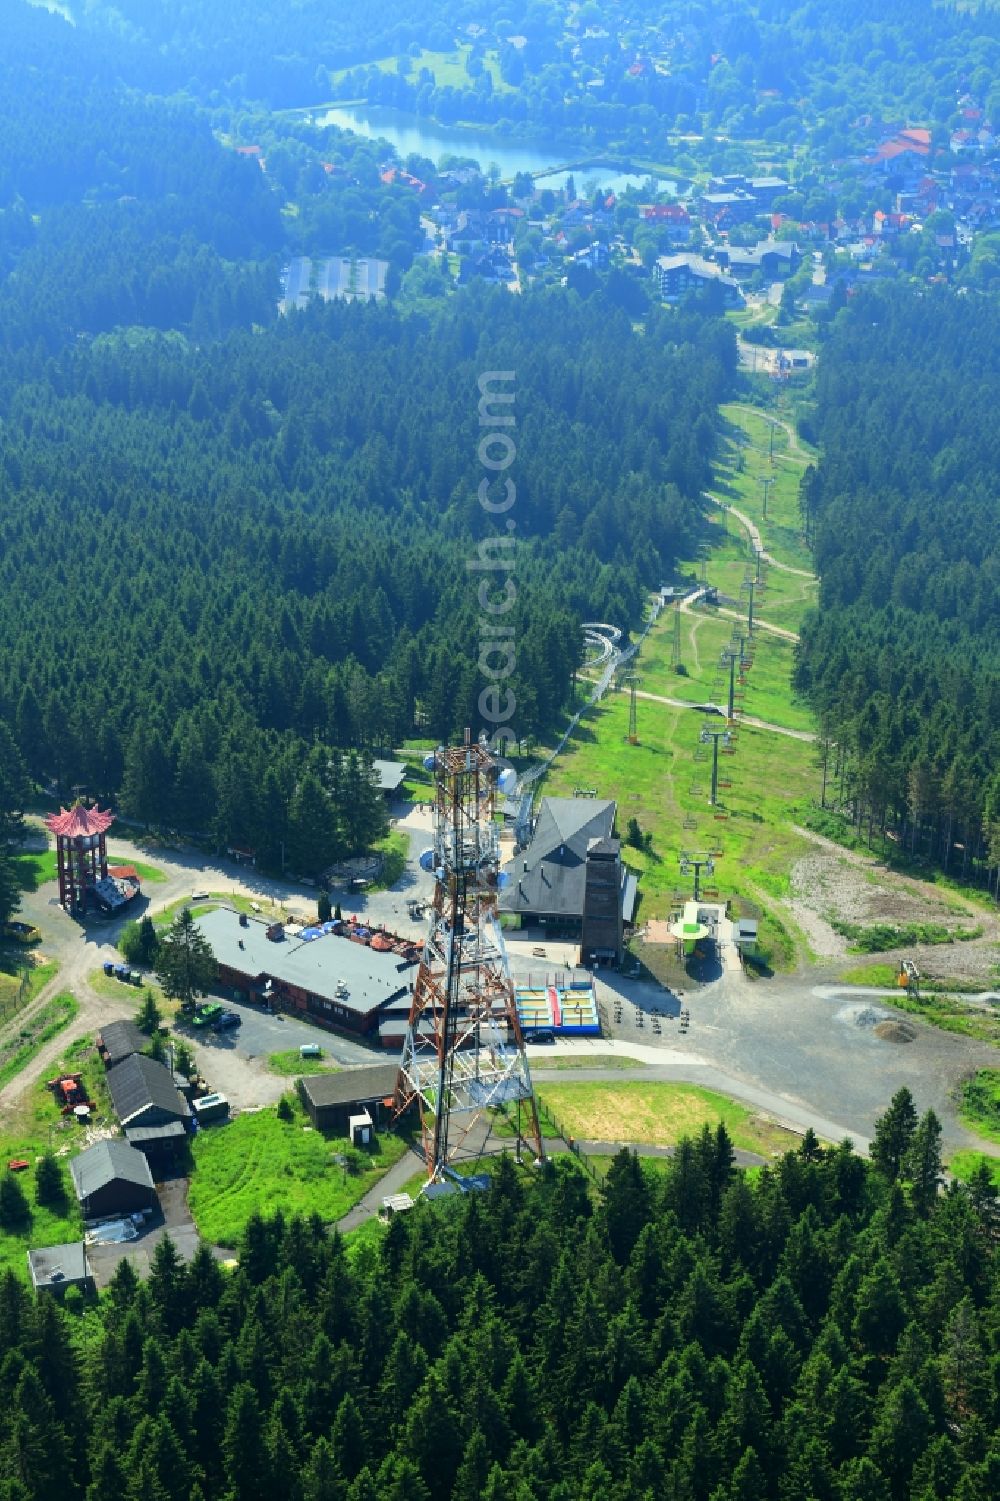 Aerial photograph Hahnenklee - Mountain slope with downhill ski slope and cable car - lift on Bocksberg in Hahnenklee in the state Lower Saxony, Germany